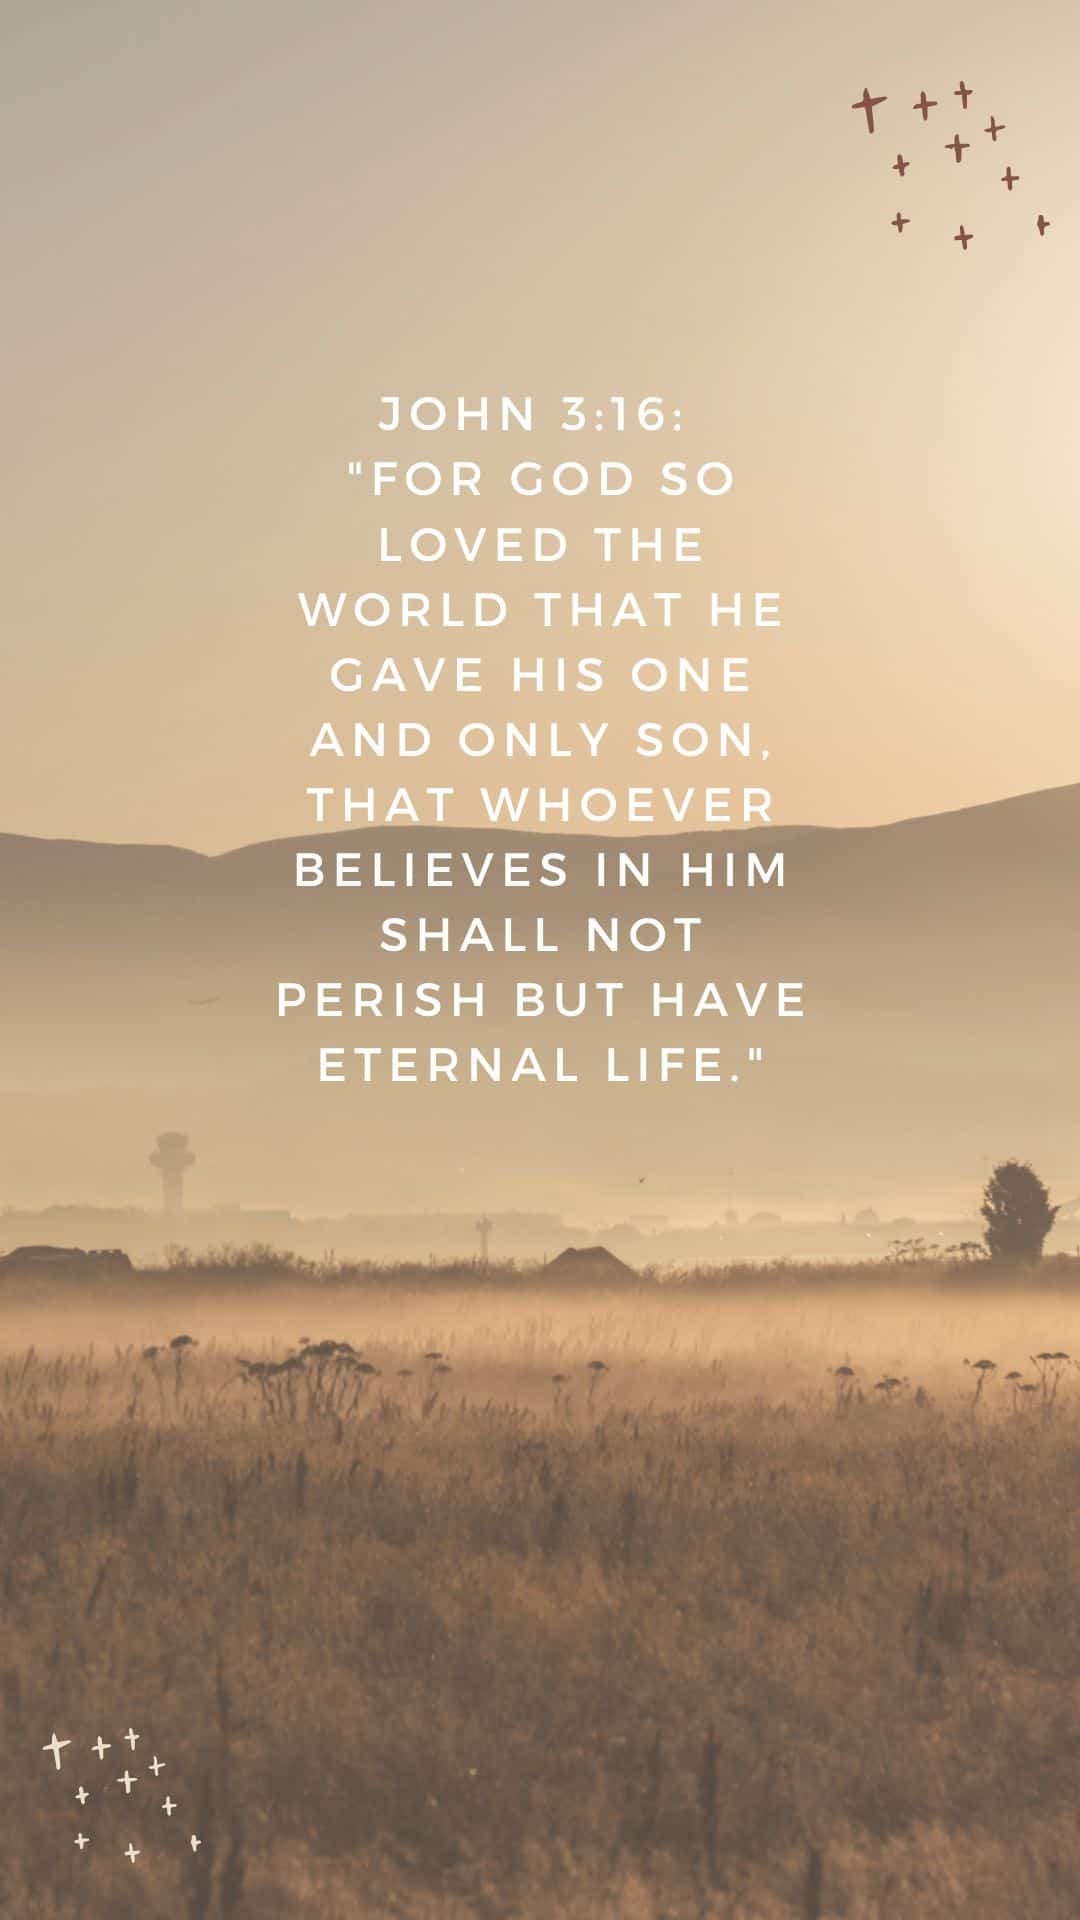 John 3:16: "For God so loved the world that he gave his one and only Son, that whoever believes in him shall not perish but have eternal life." - Christian wallpaper bible verse